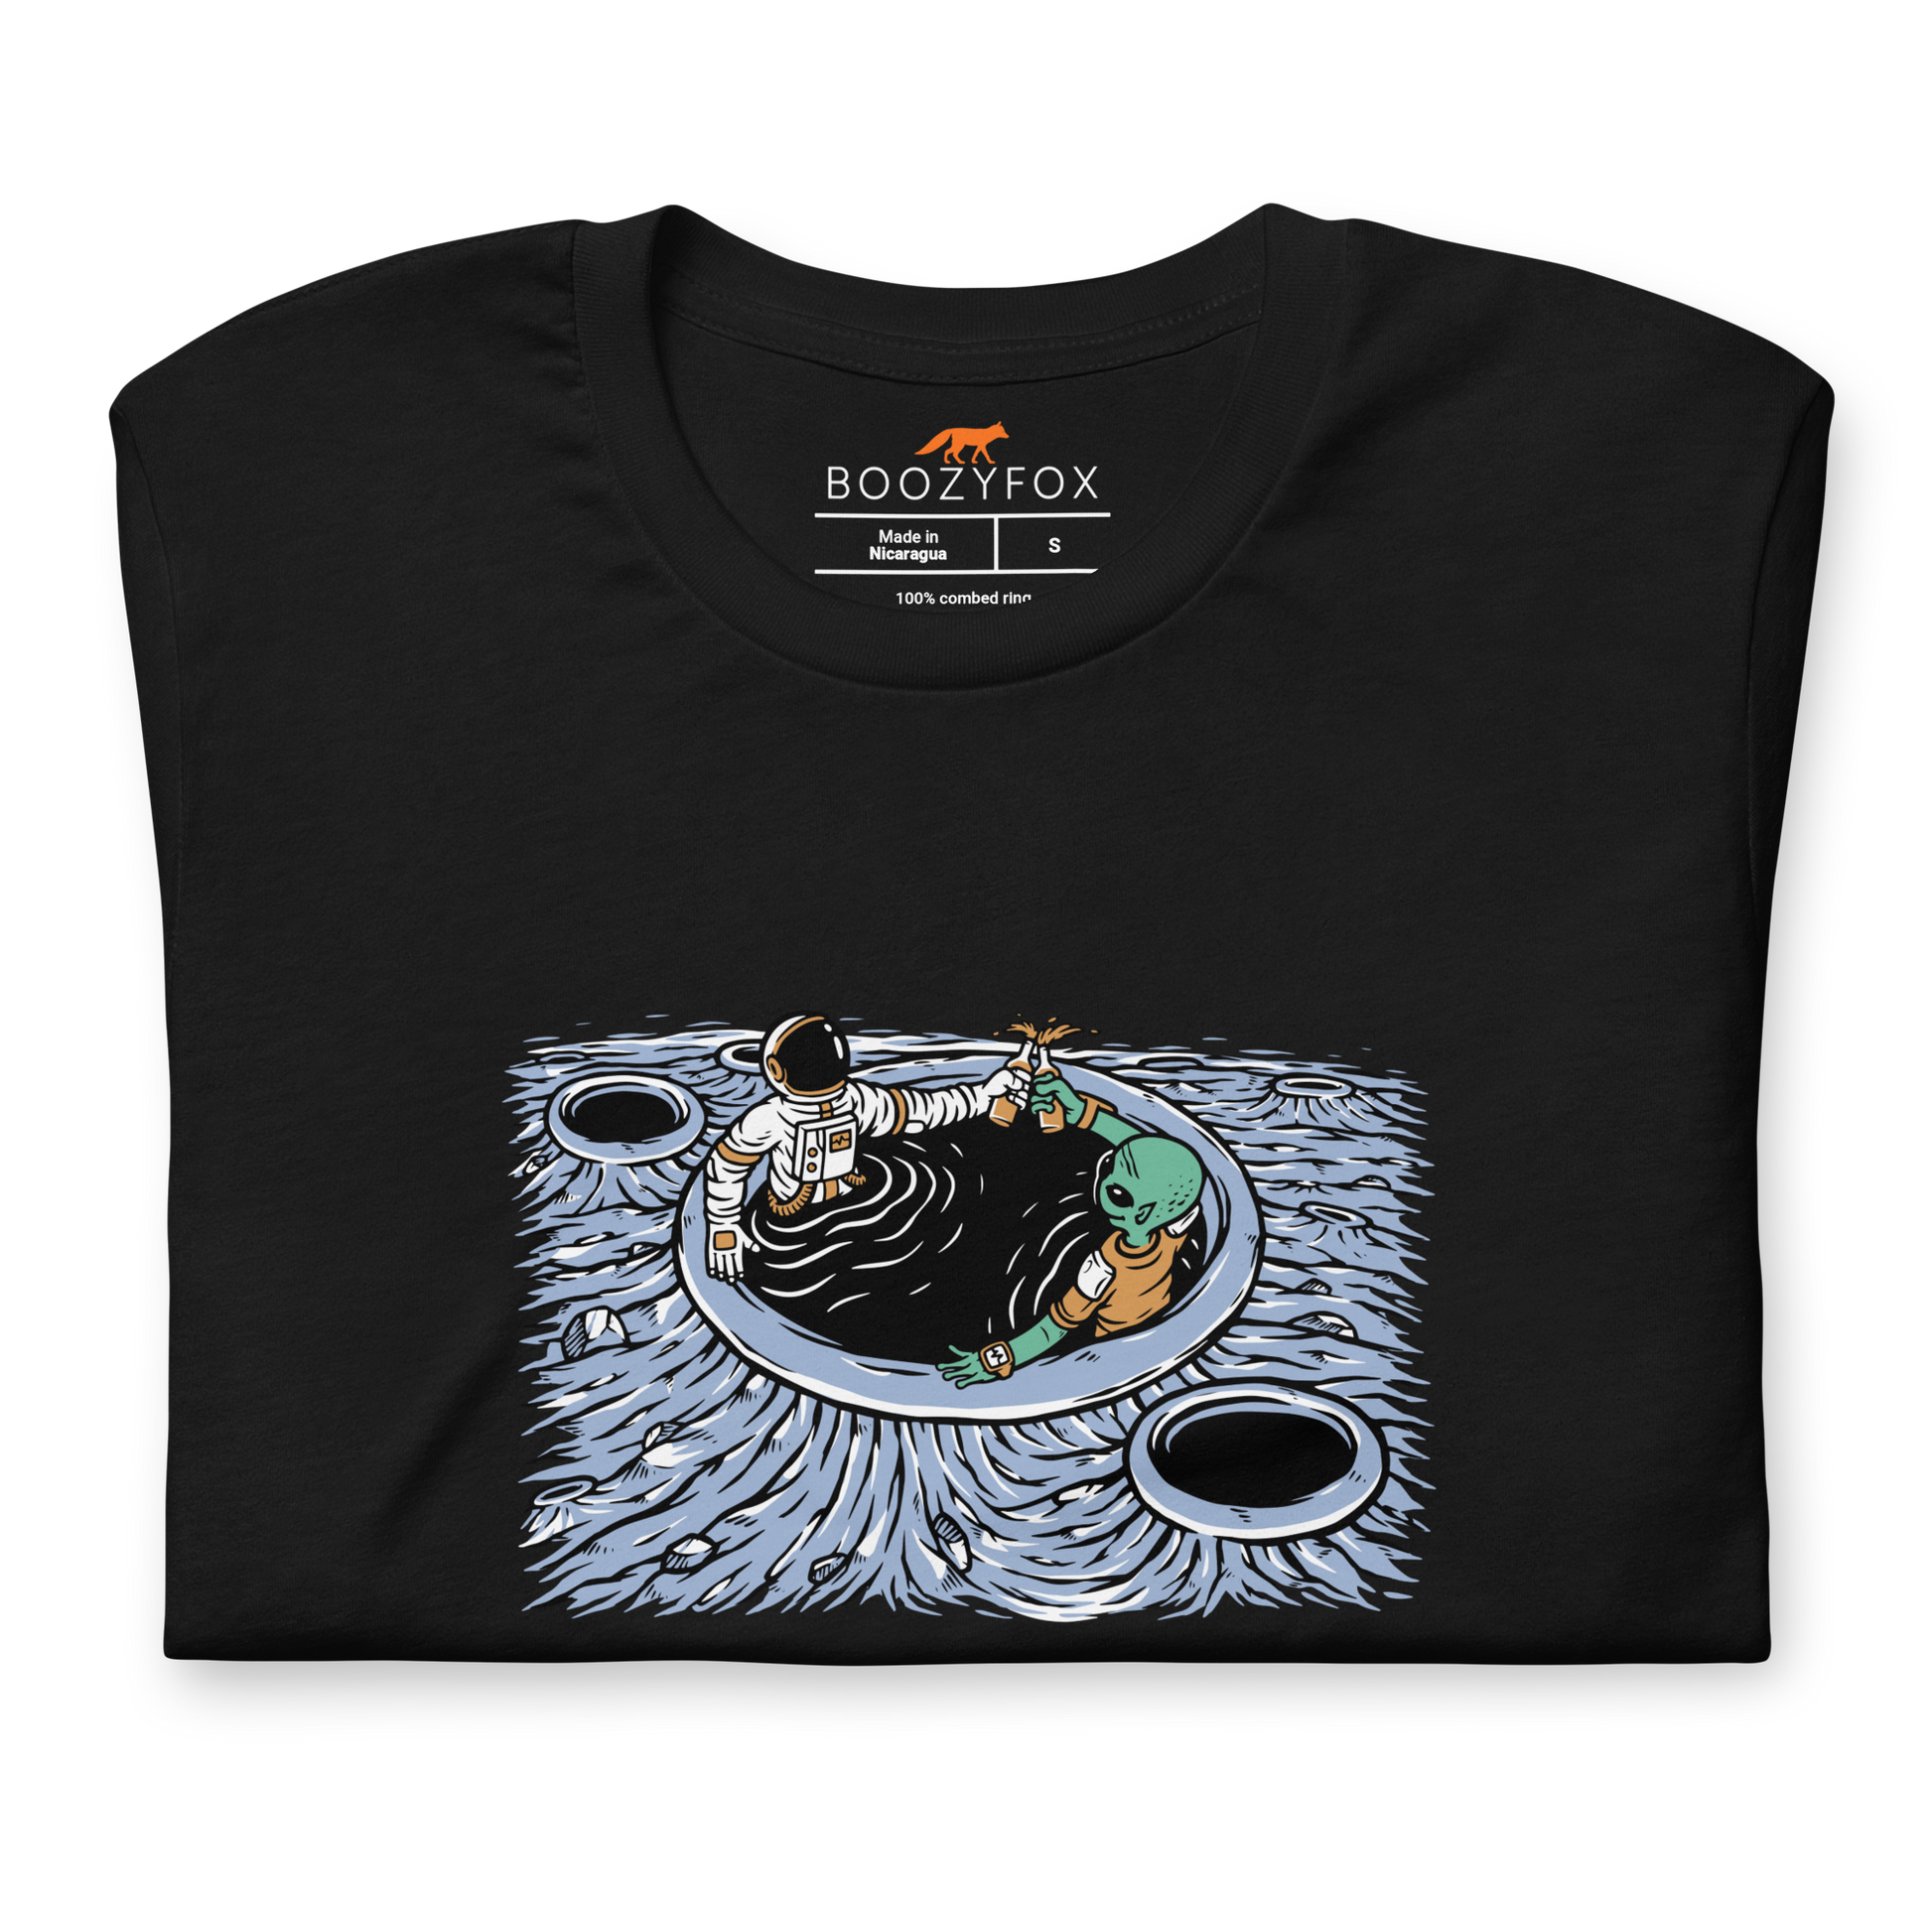 Front details of a Black Premium Galactic Hangs Tee featuring an out-of-this-world graphic of an Astronaut and Alien Chilling Together - Funny Graphic Space Tees - Boozy Fox